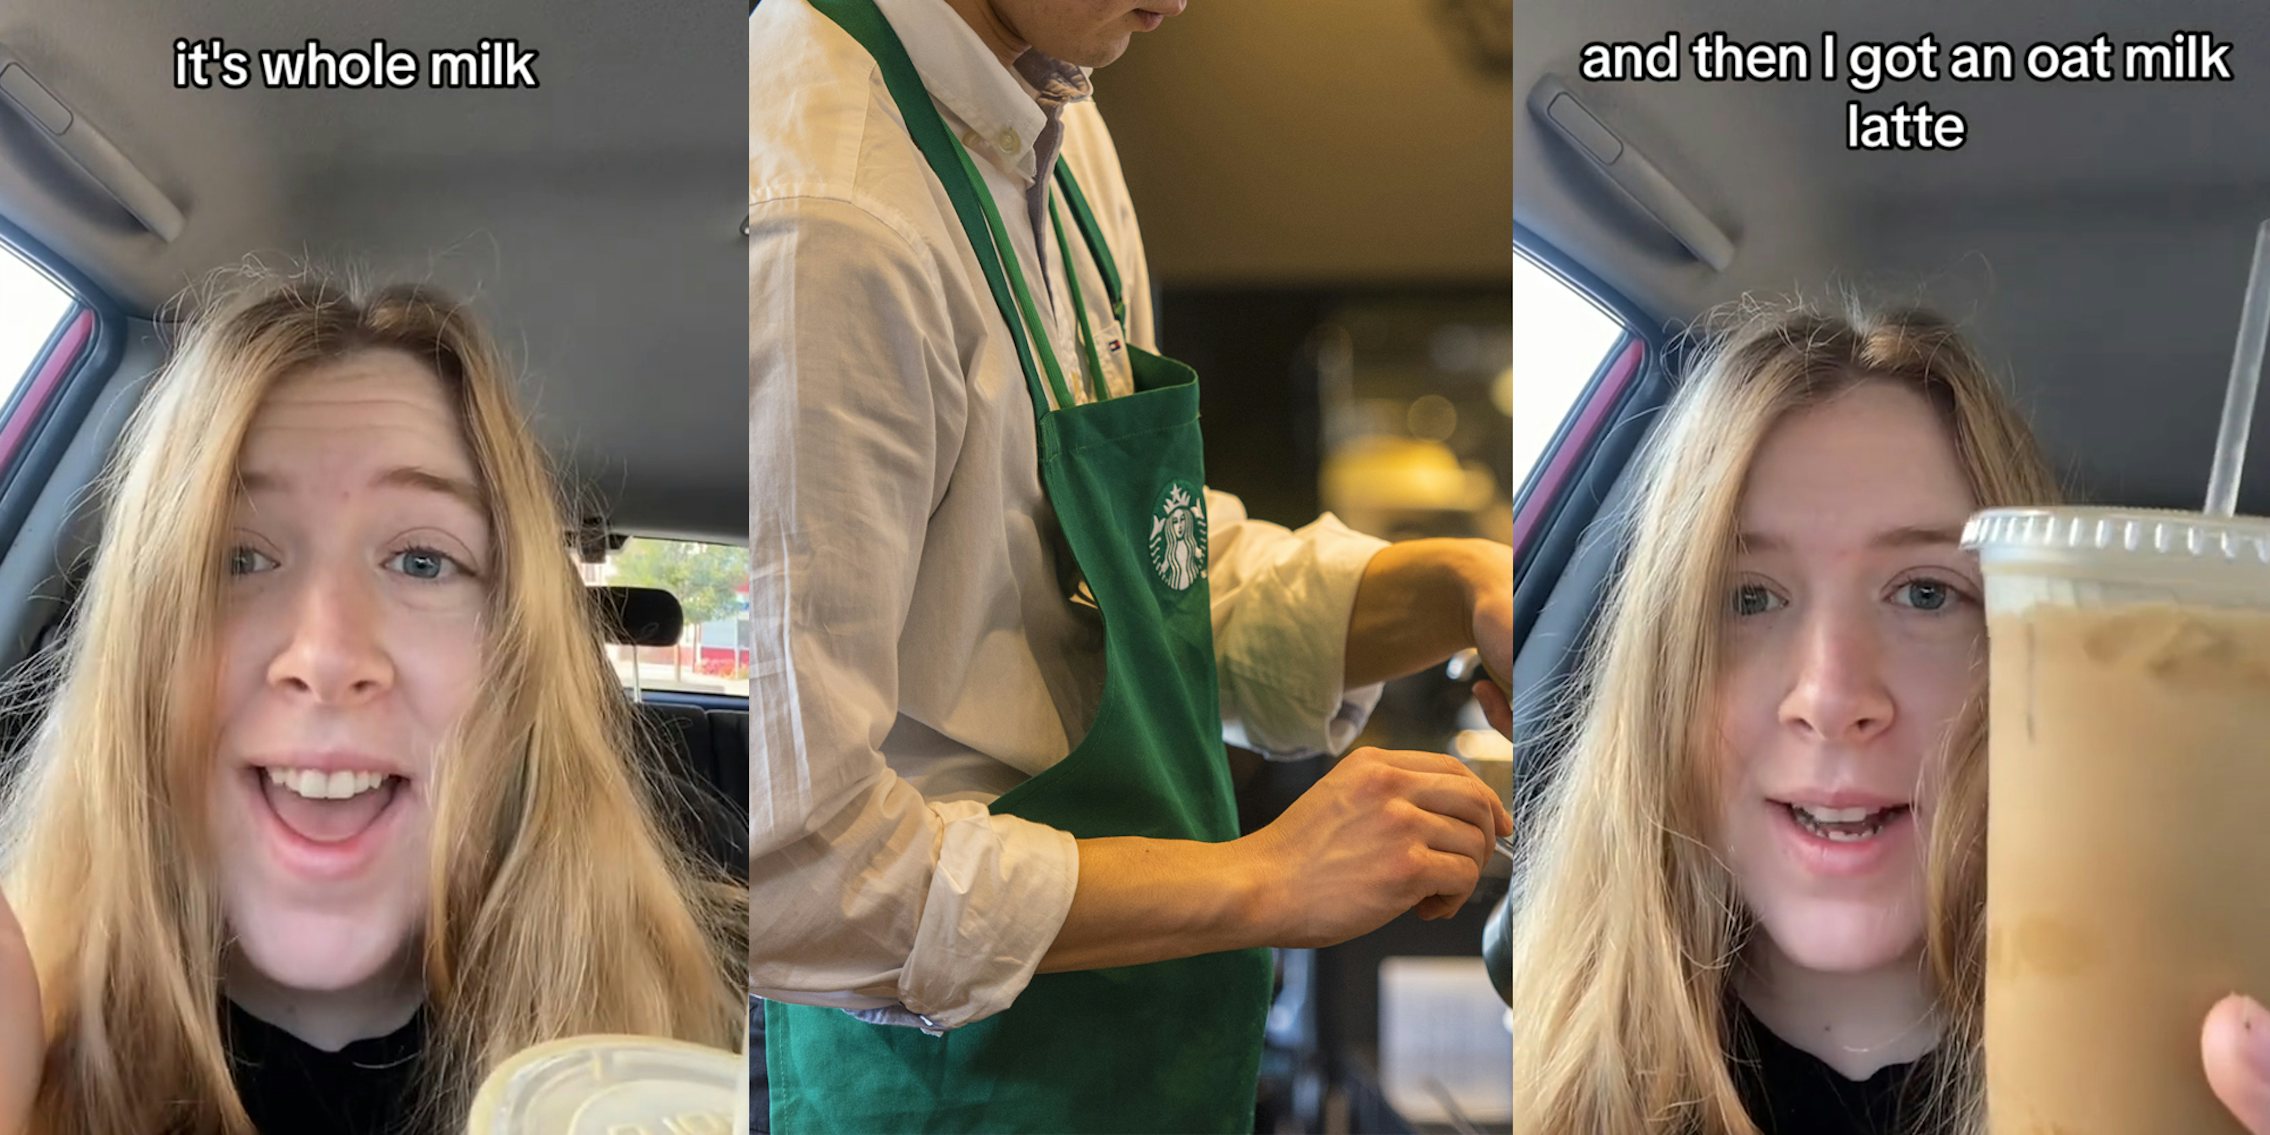 Starbucks customer speaking in car with caption 'it's whole milk' (l) Starbucks barista with branded apron on (c) Starbucks customer speaking in car with caption 'and then I got an oak milk latte' (r)